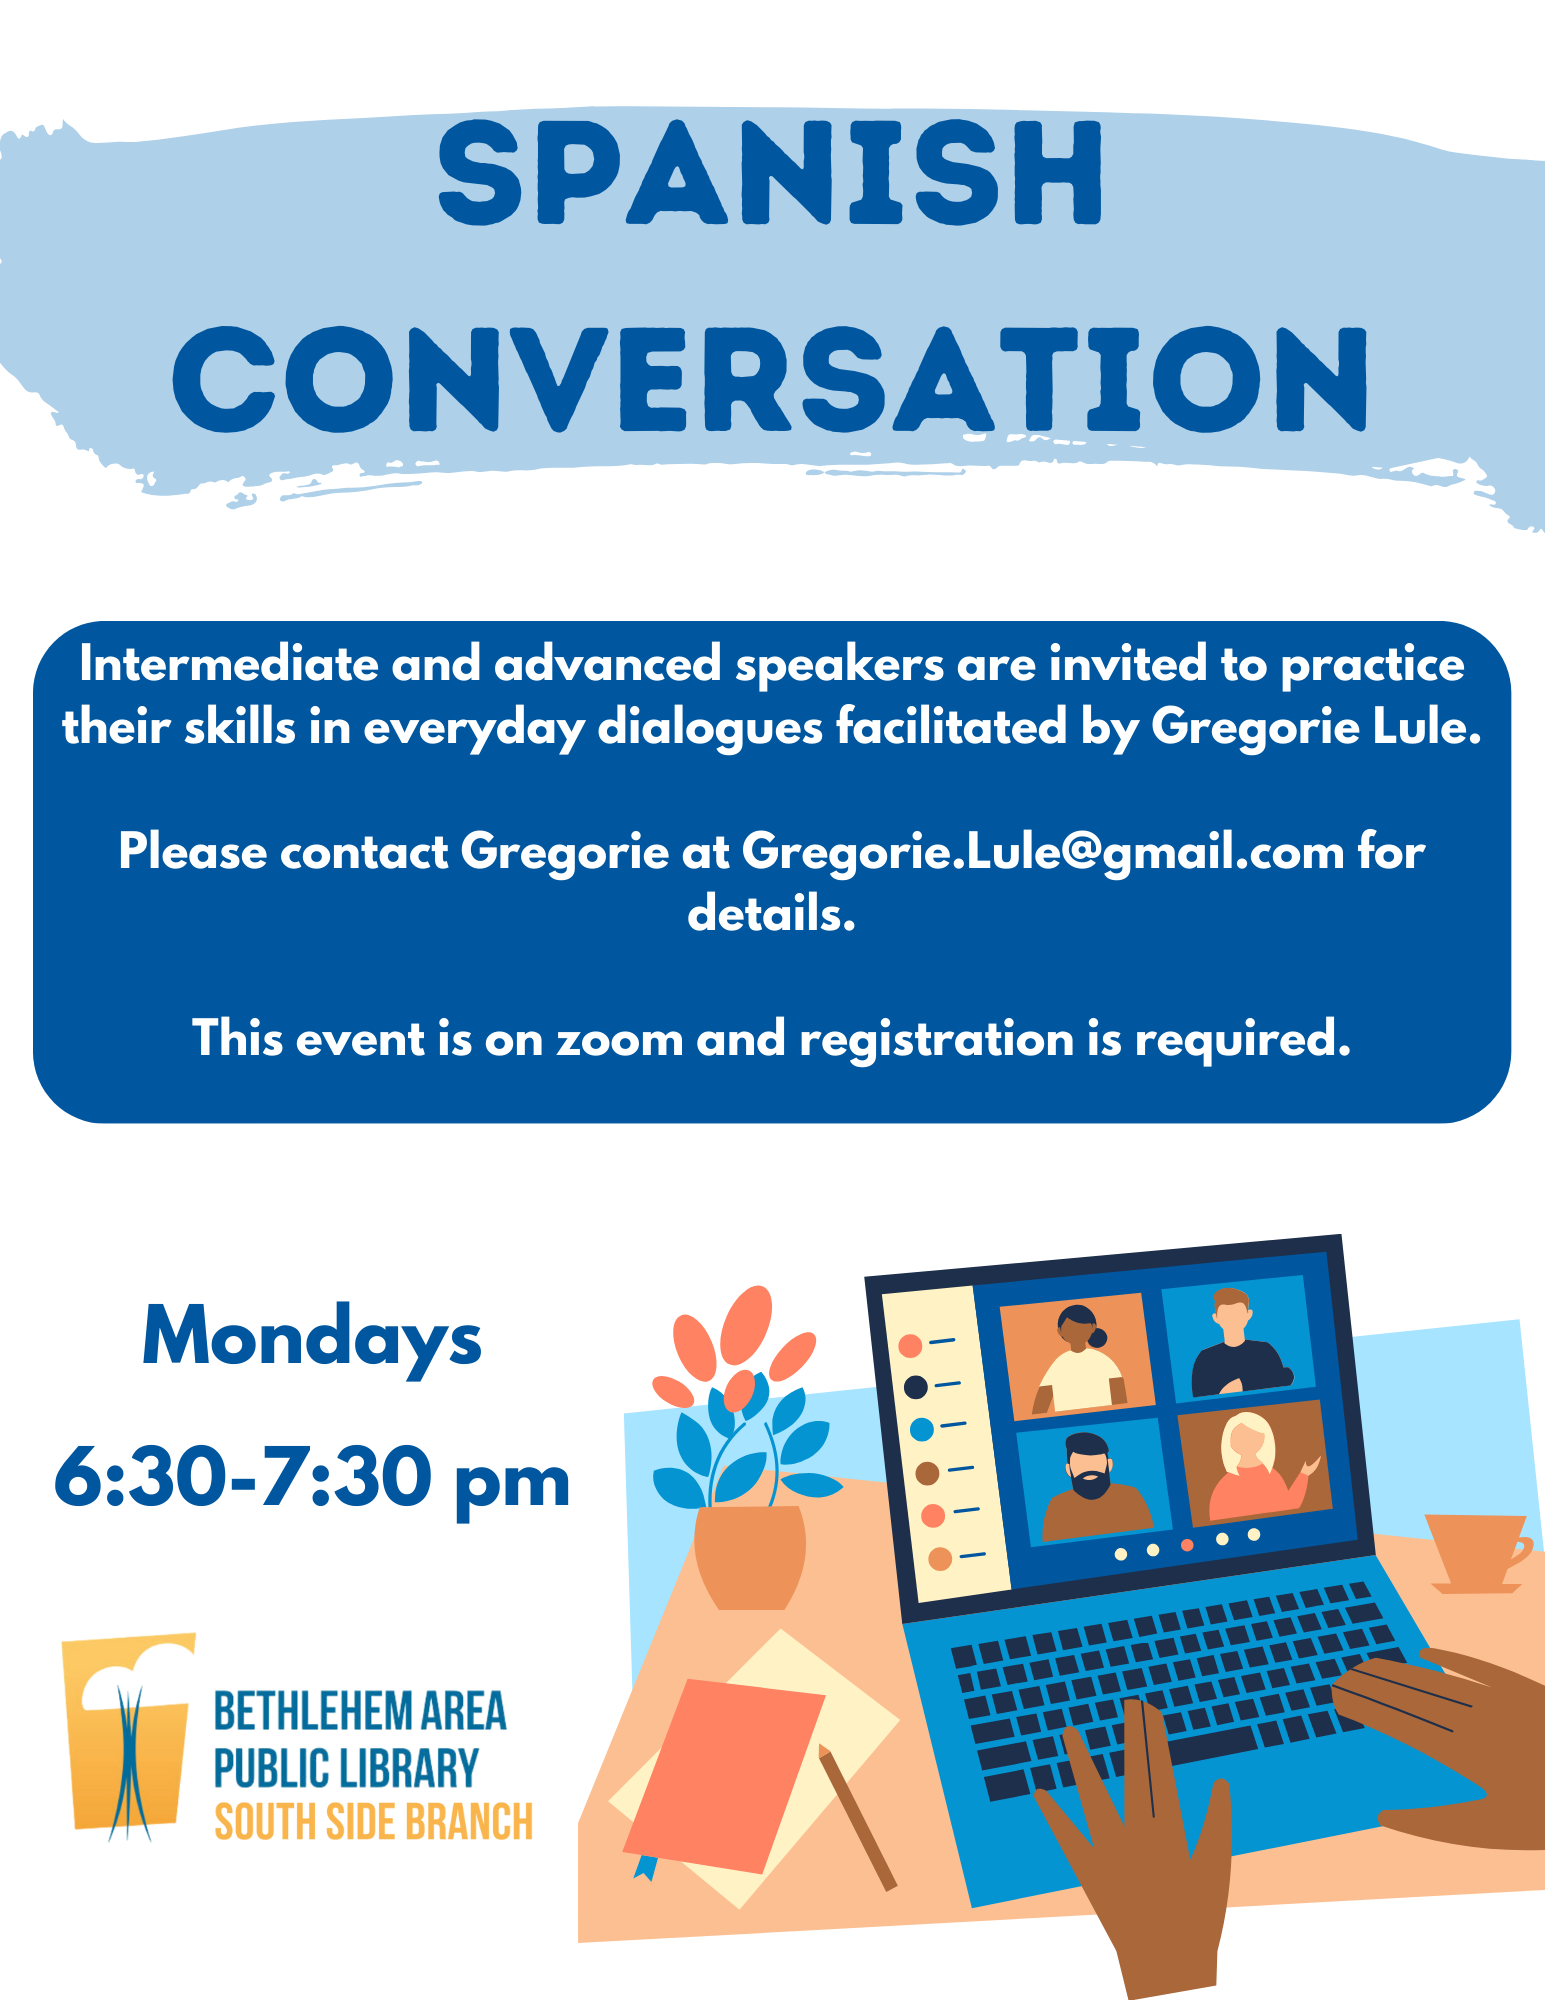 Intermediate and advanced speakers are invited to practice their skills in everyday dialogues facilitated by Gregorie Lule.  Please contact Gregorie at Gregorie.Lule@gmail.com for details. This event is on zoom and registration is required.  Spanish Conversation is on Monday nights from 6:30-7:30 PM.